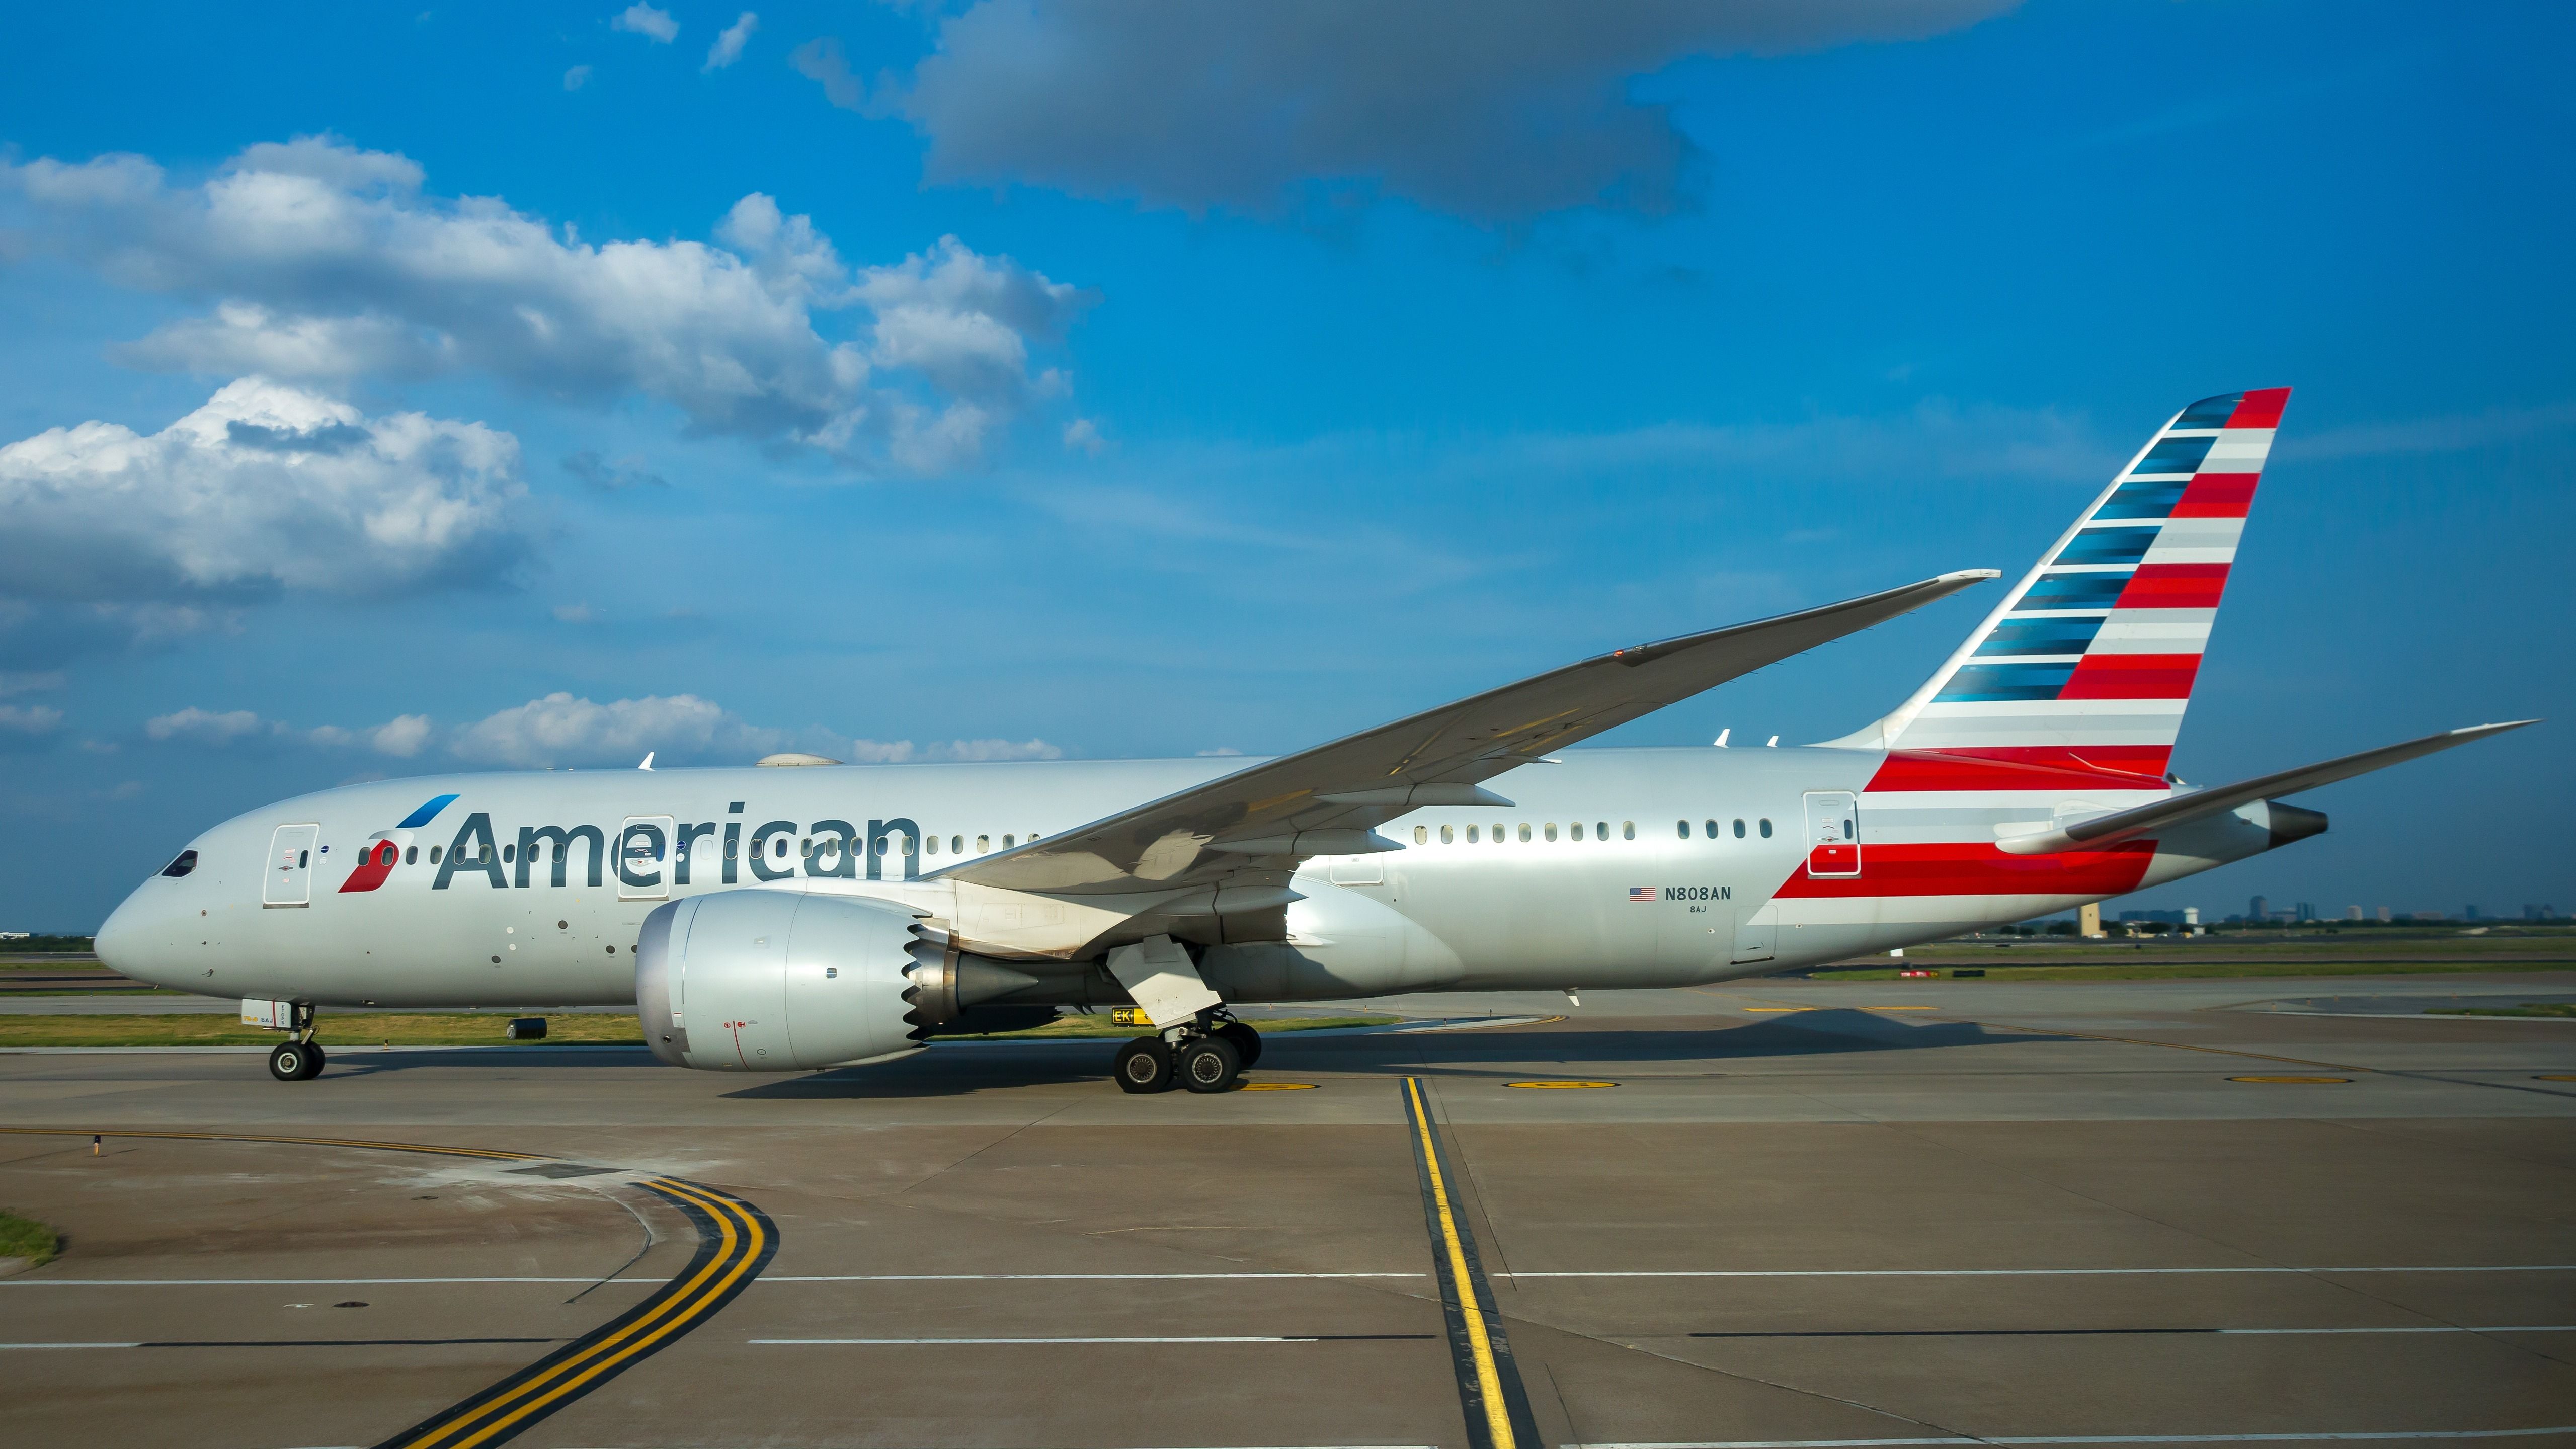 American Airlines Adds 1st Non-Stop Route From Philadelphia To São Paulo For Eagles Season Opener